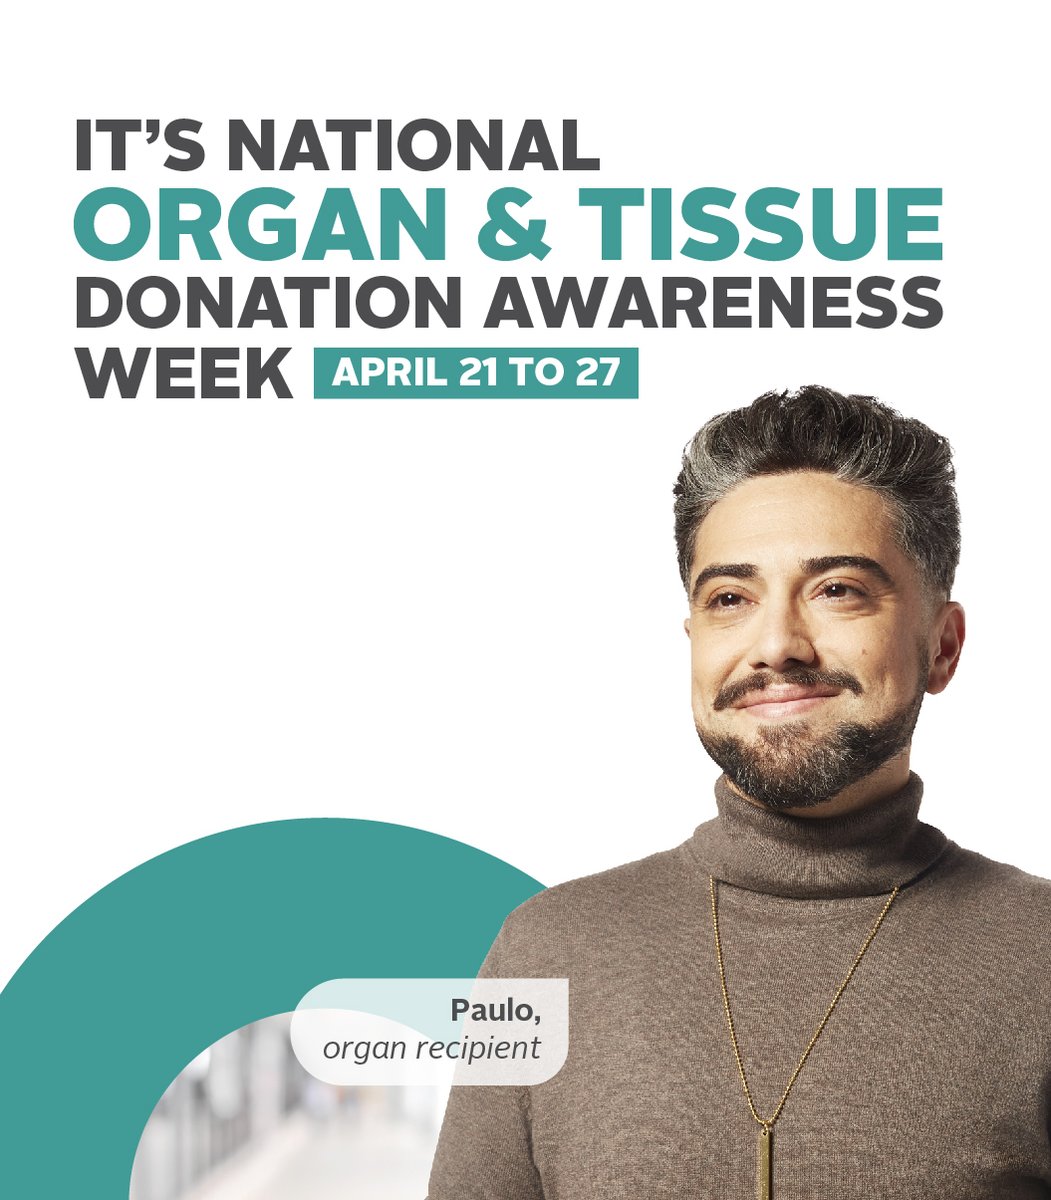 National Organ and Tissue Donation Awareness Week (NOTDAW) takes place April 21-27. It’s an opportunity to recognize those who have donated to save others, and celebrate those who have received lifesaving transplants. Learn more: ow.ly/gobI50Rkabl